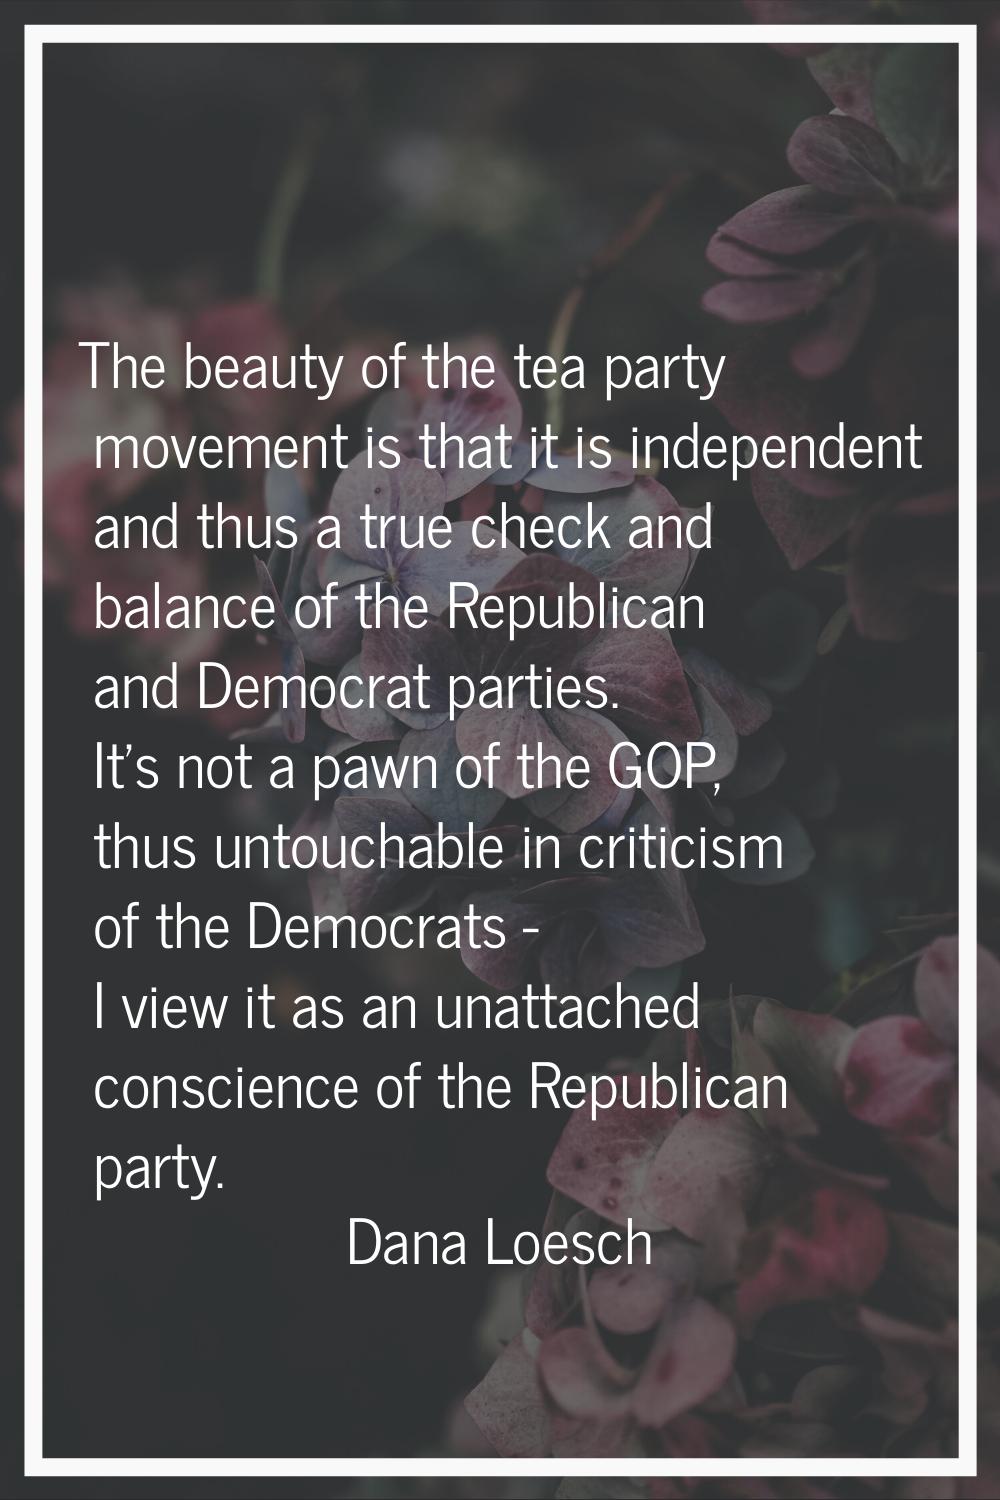 The beauty of the tea party movement is that it is independent and thus a true check and balance of